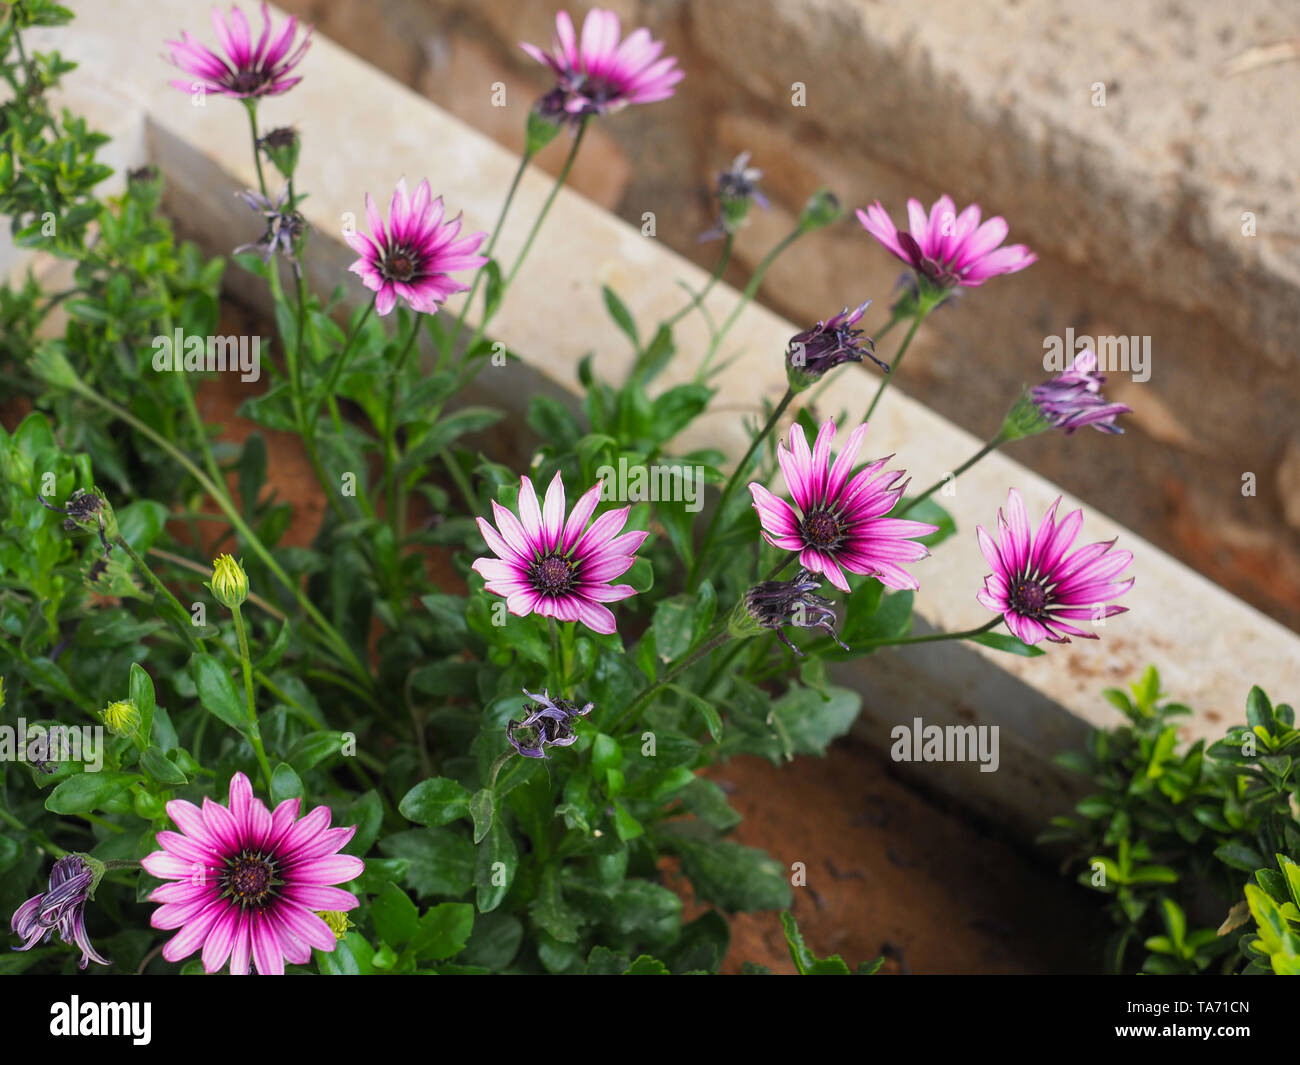 Osteospermum fruticosum, also called African daisy, daisy bush or African moon is a shrubby, semi succulent herbaceous flowering plant. White flowers. Stock Photo